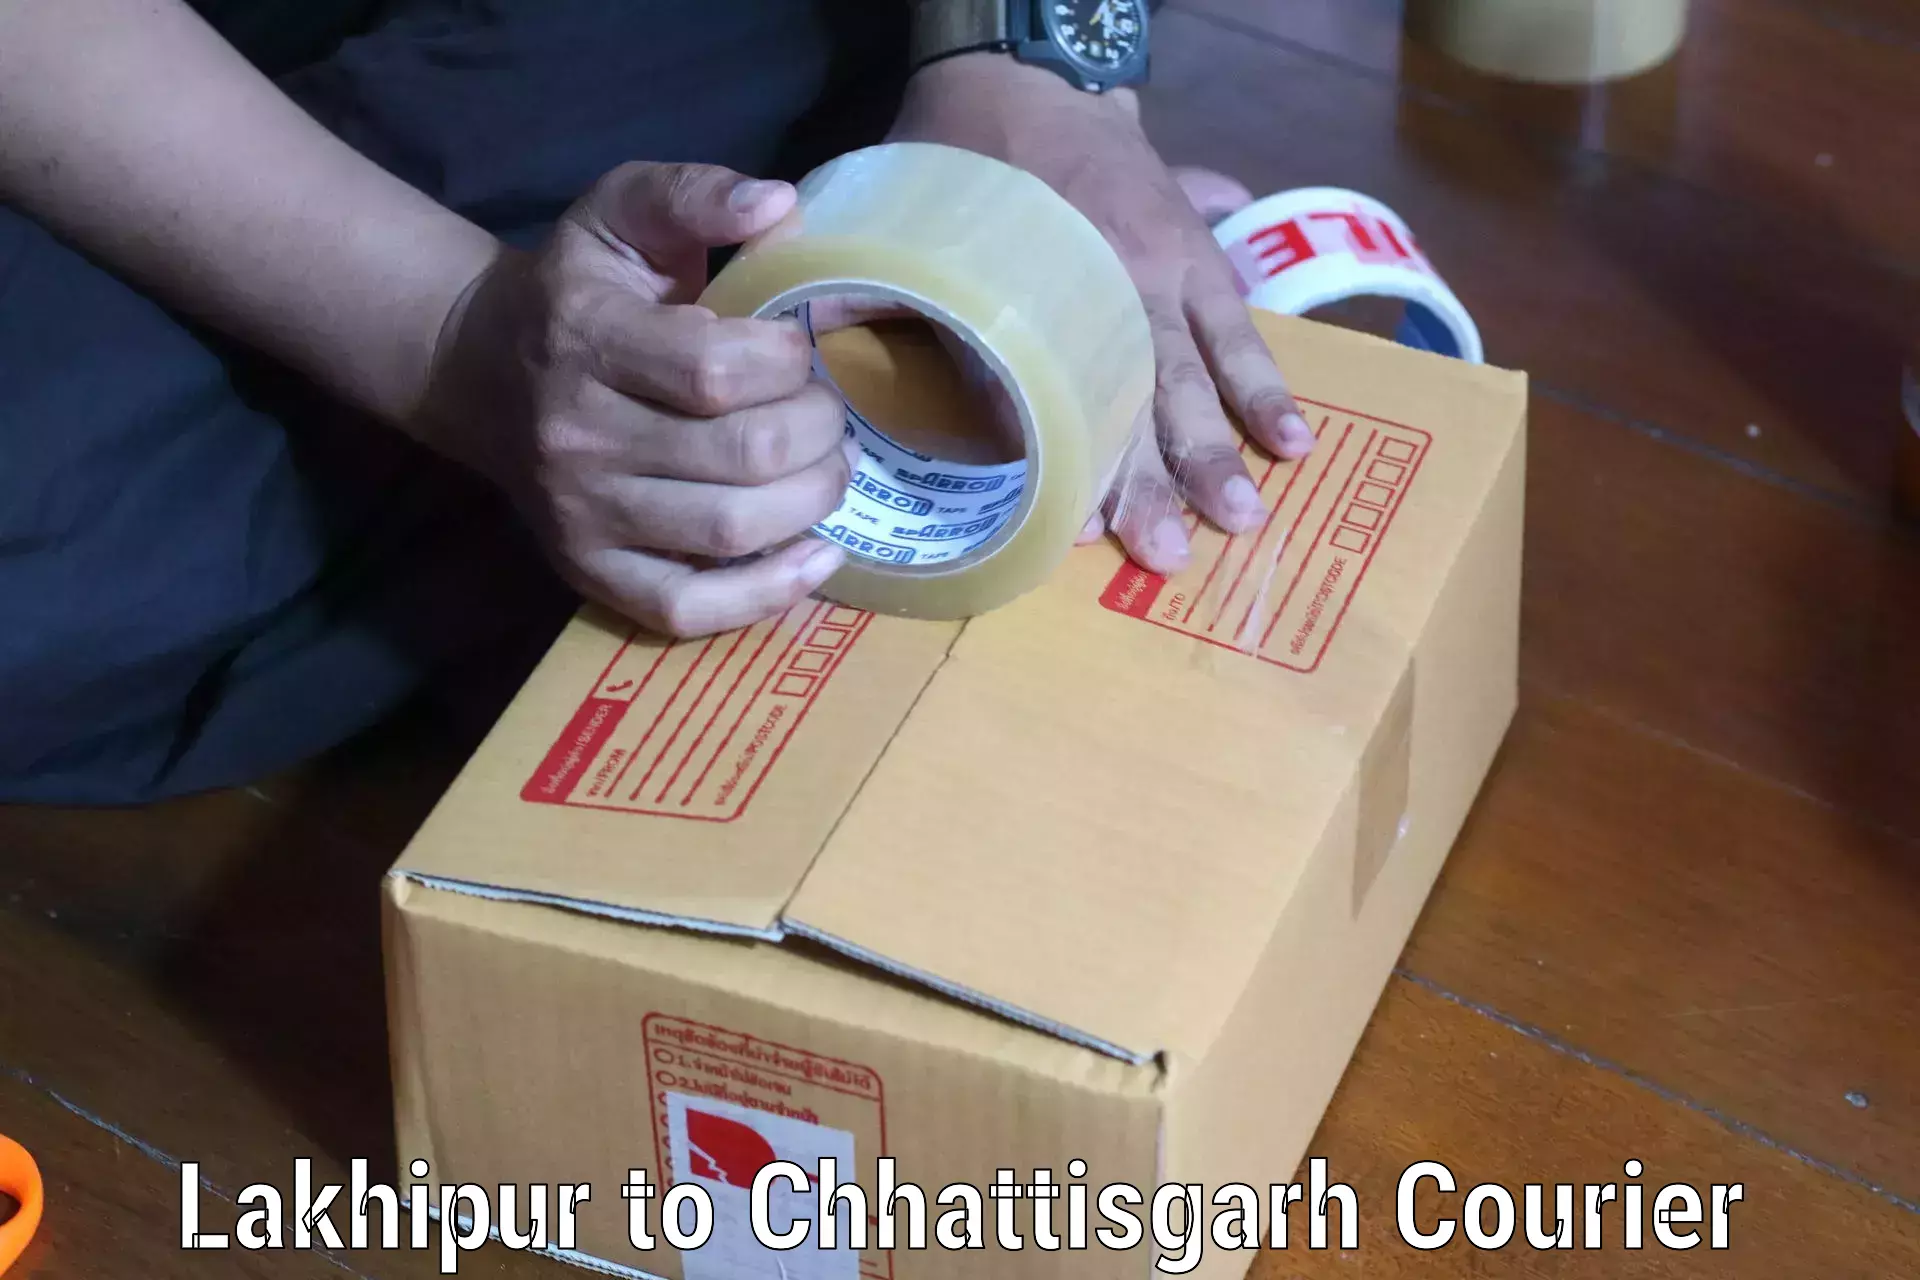 State-of-the-art courier technology Lakhipur to Kawardha